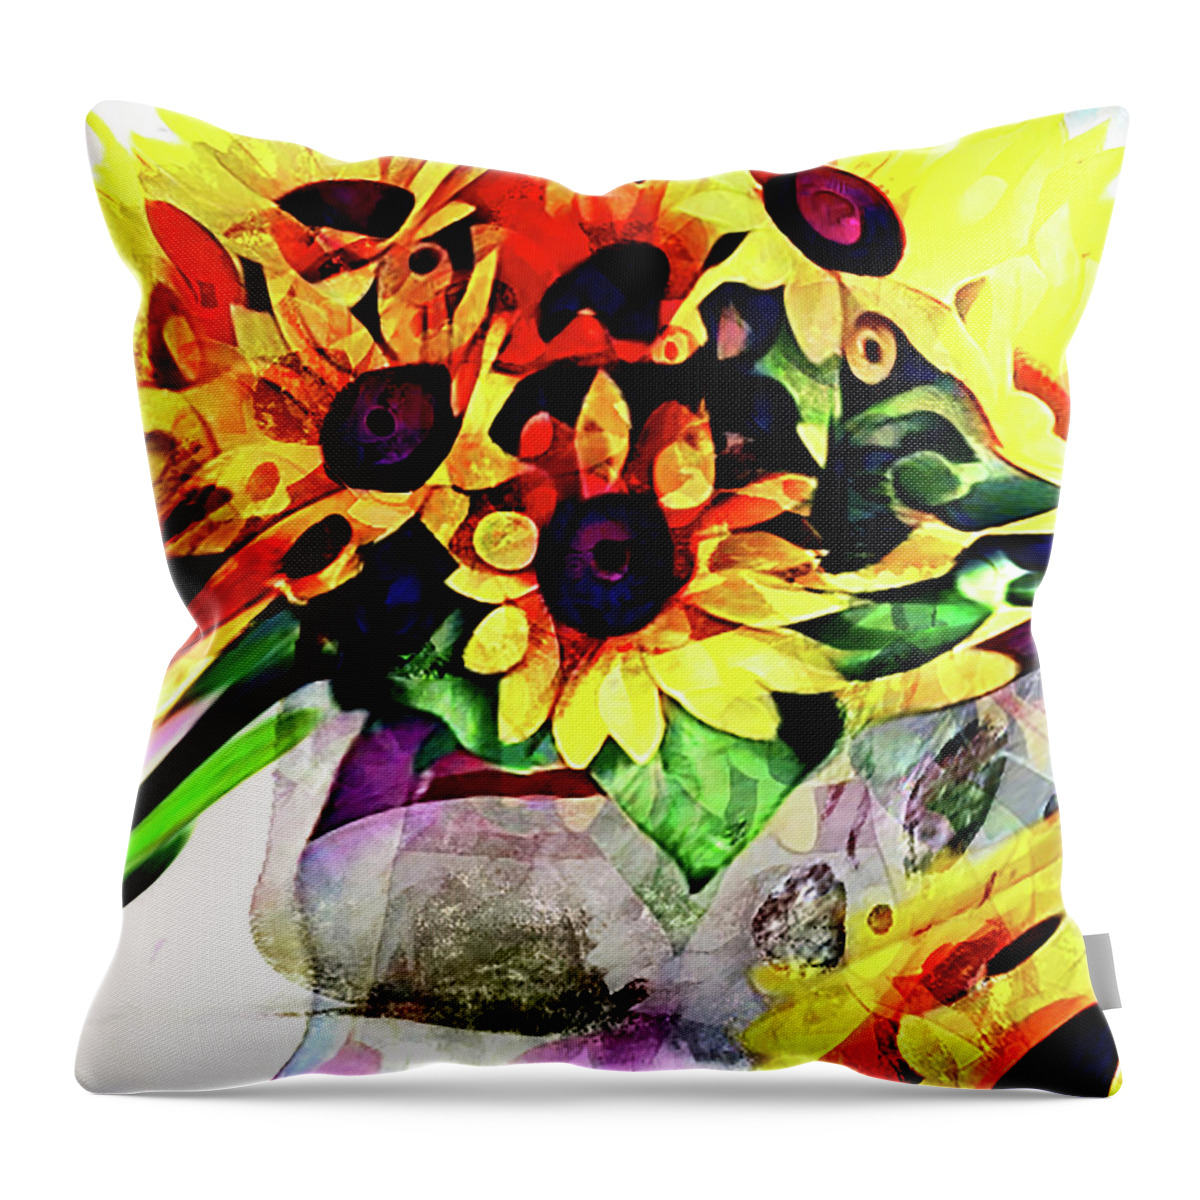 Sunflowers Throw Pillow featuring the digital art Bouquet Sunflowers Abstract by Cathy Anderson